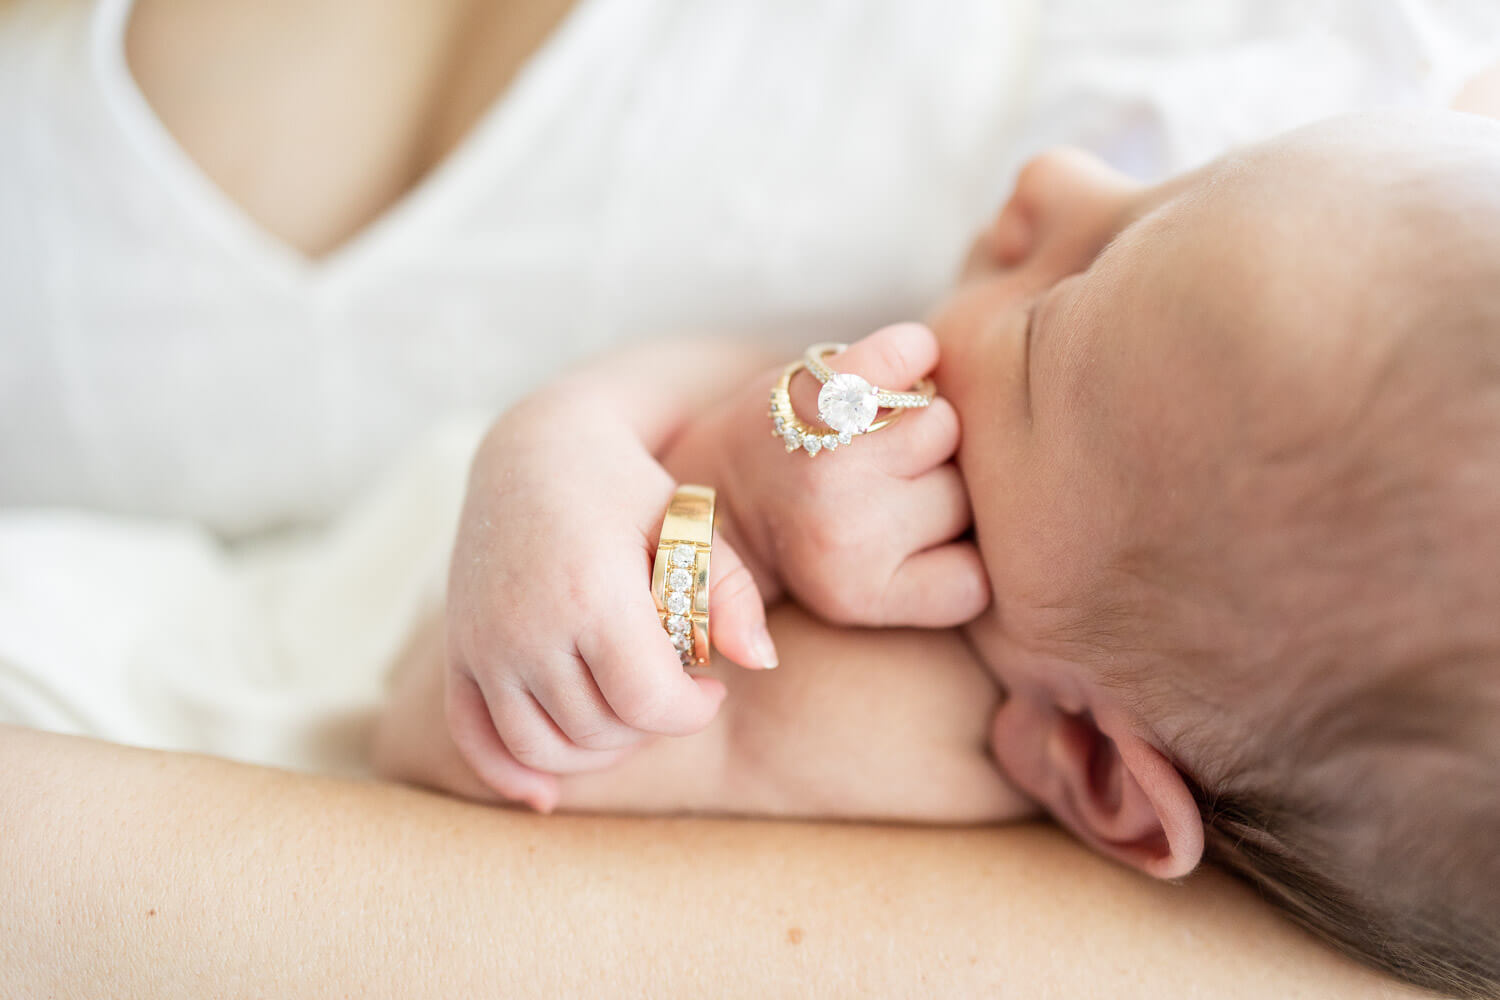 newborn with parents' rings on her fingers